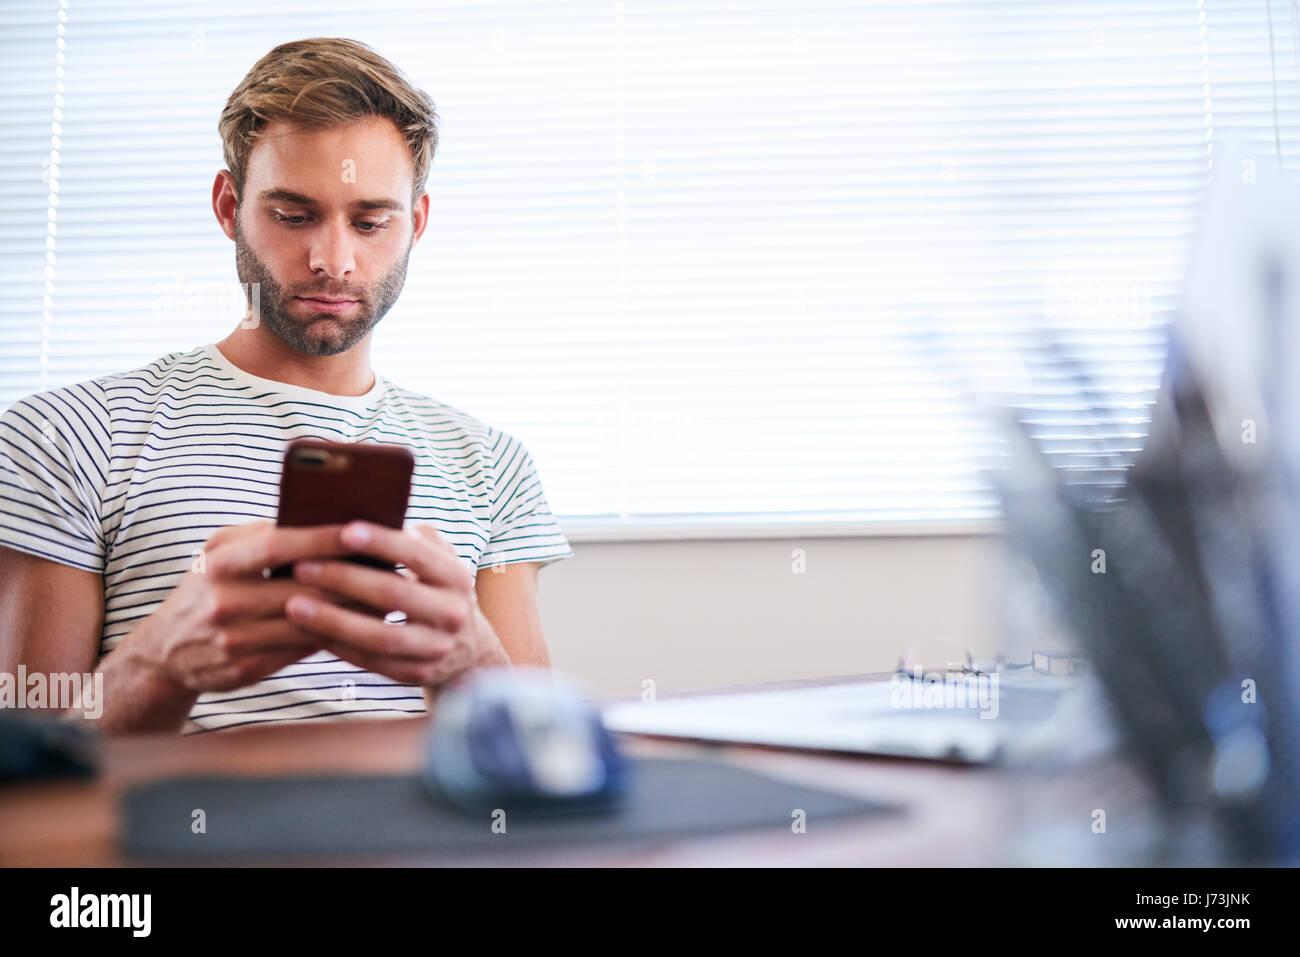 Adult caucasian man busy typing on his phone while seated Stock Photo